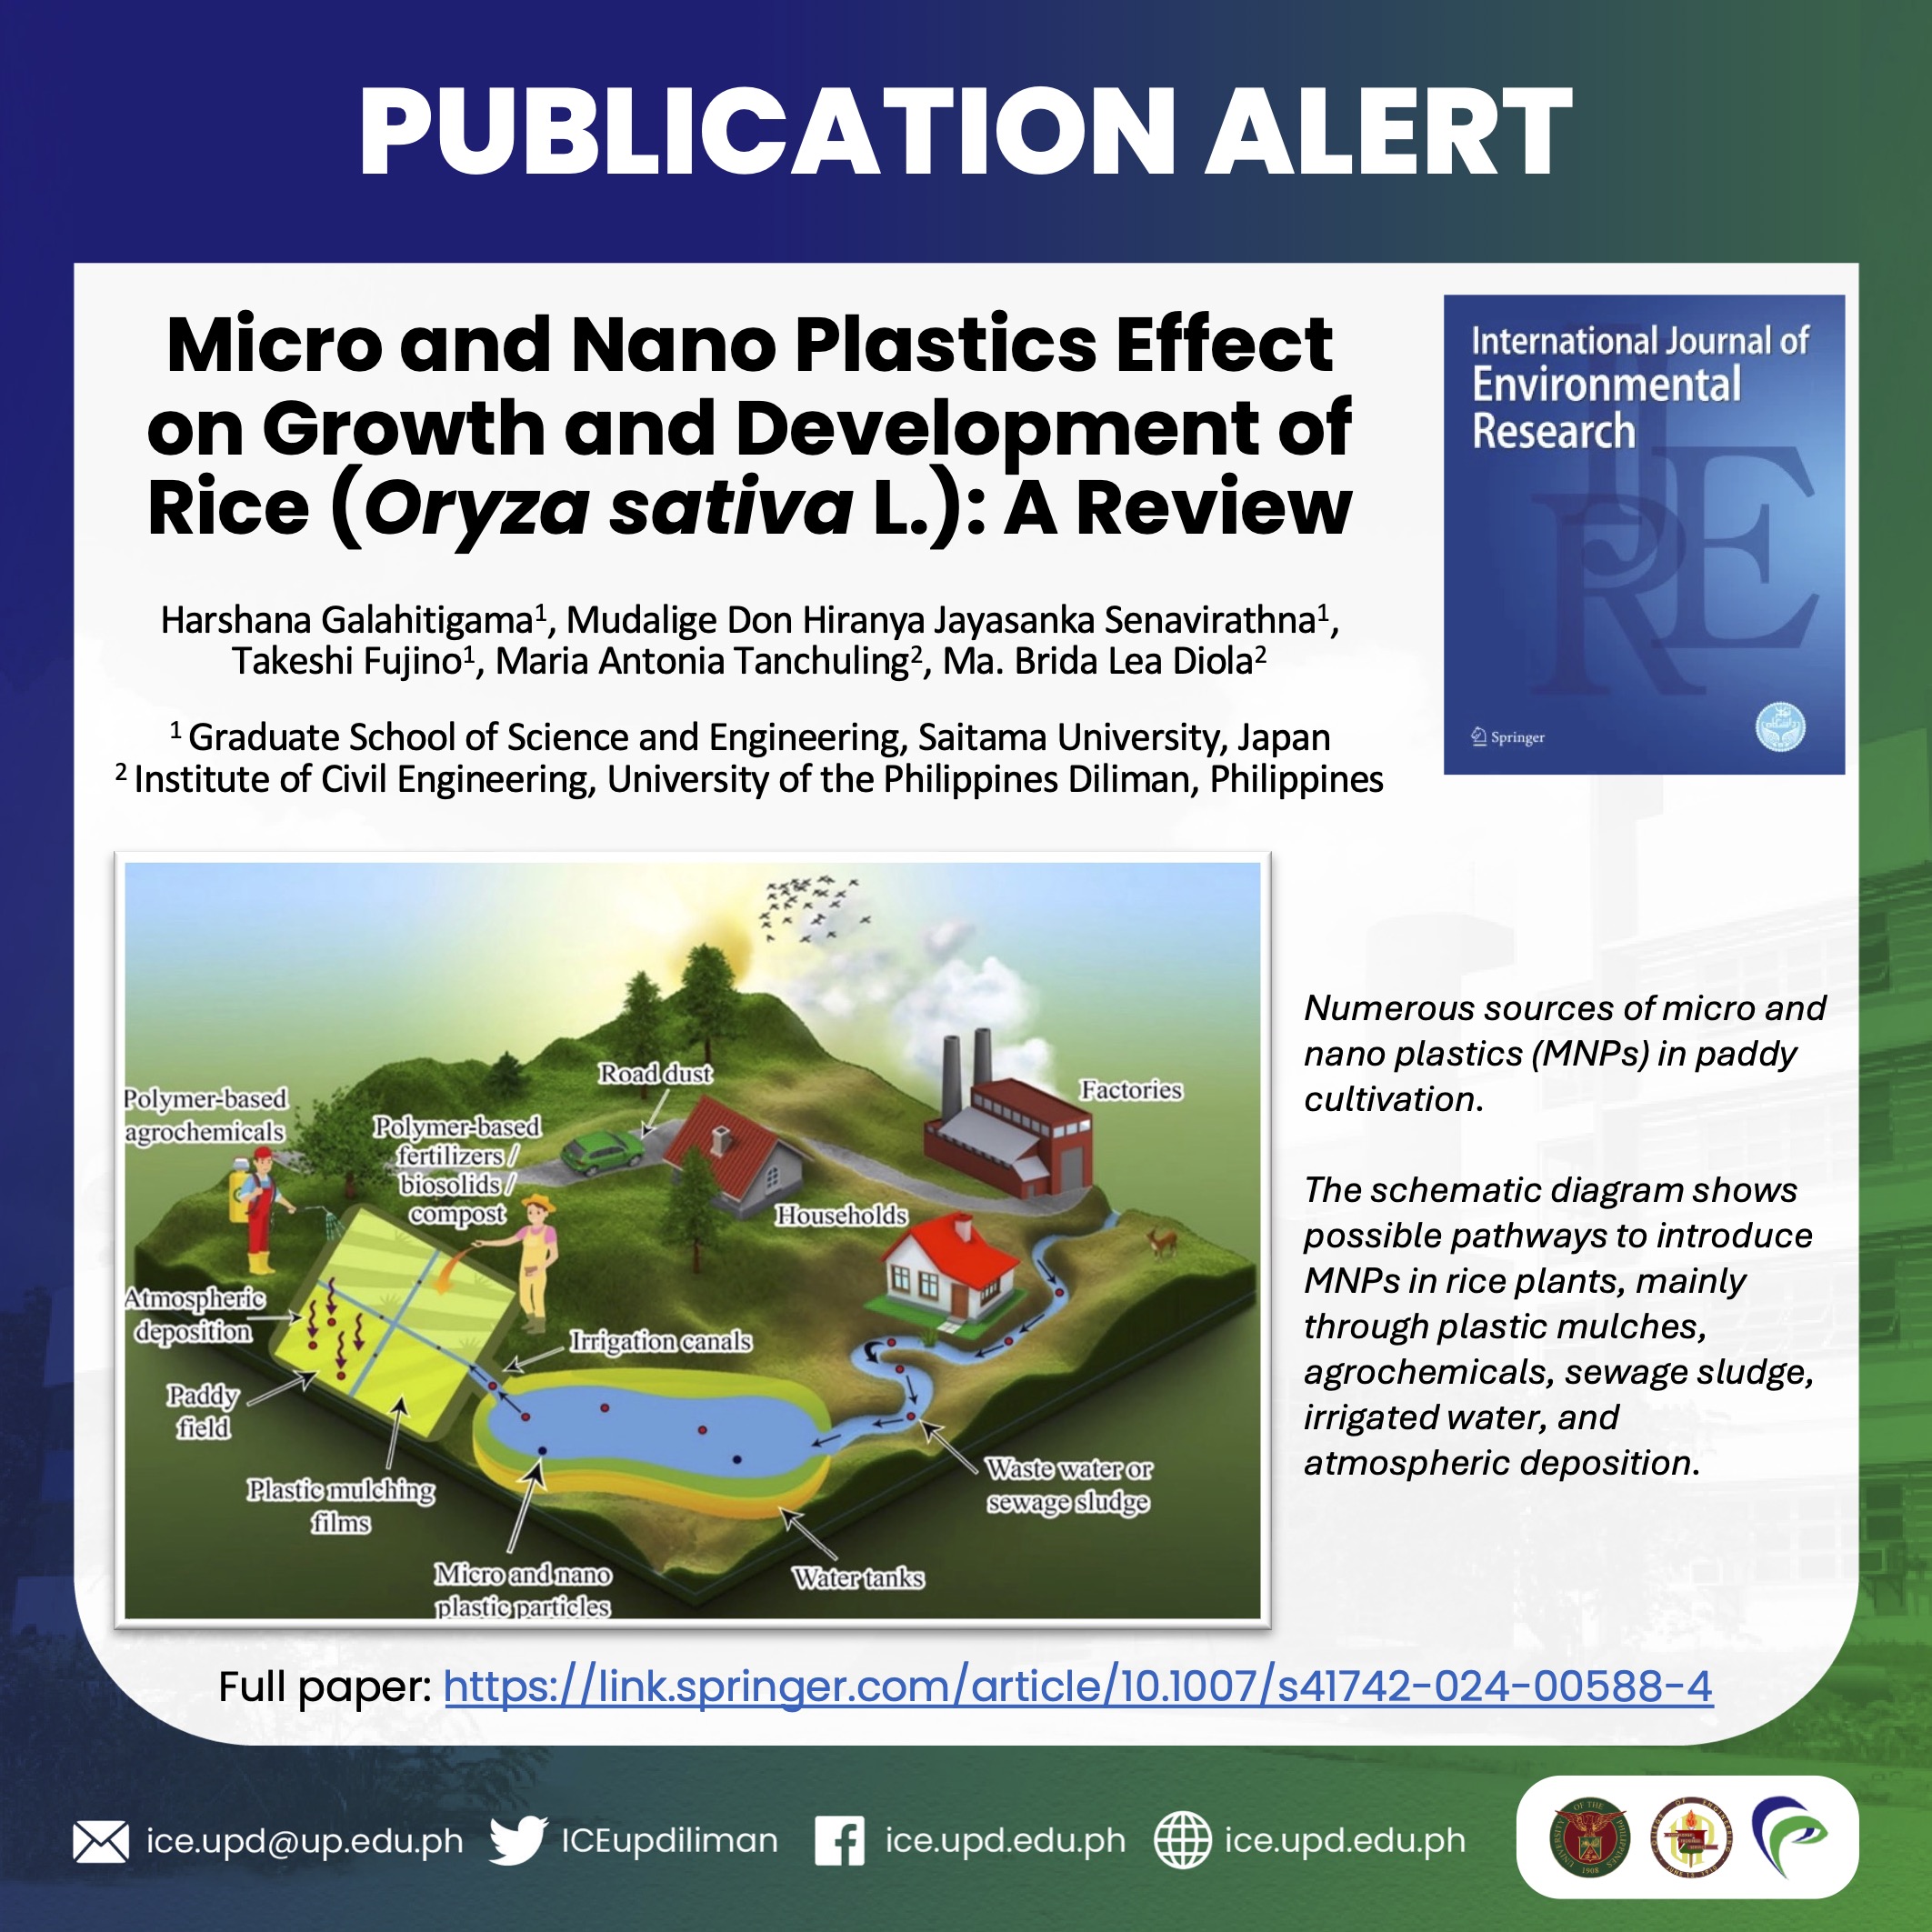 Publication Alert: EEEG members publish a review article on the effects of micro and nano plastics on rice